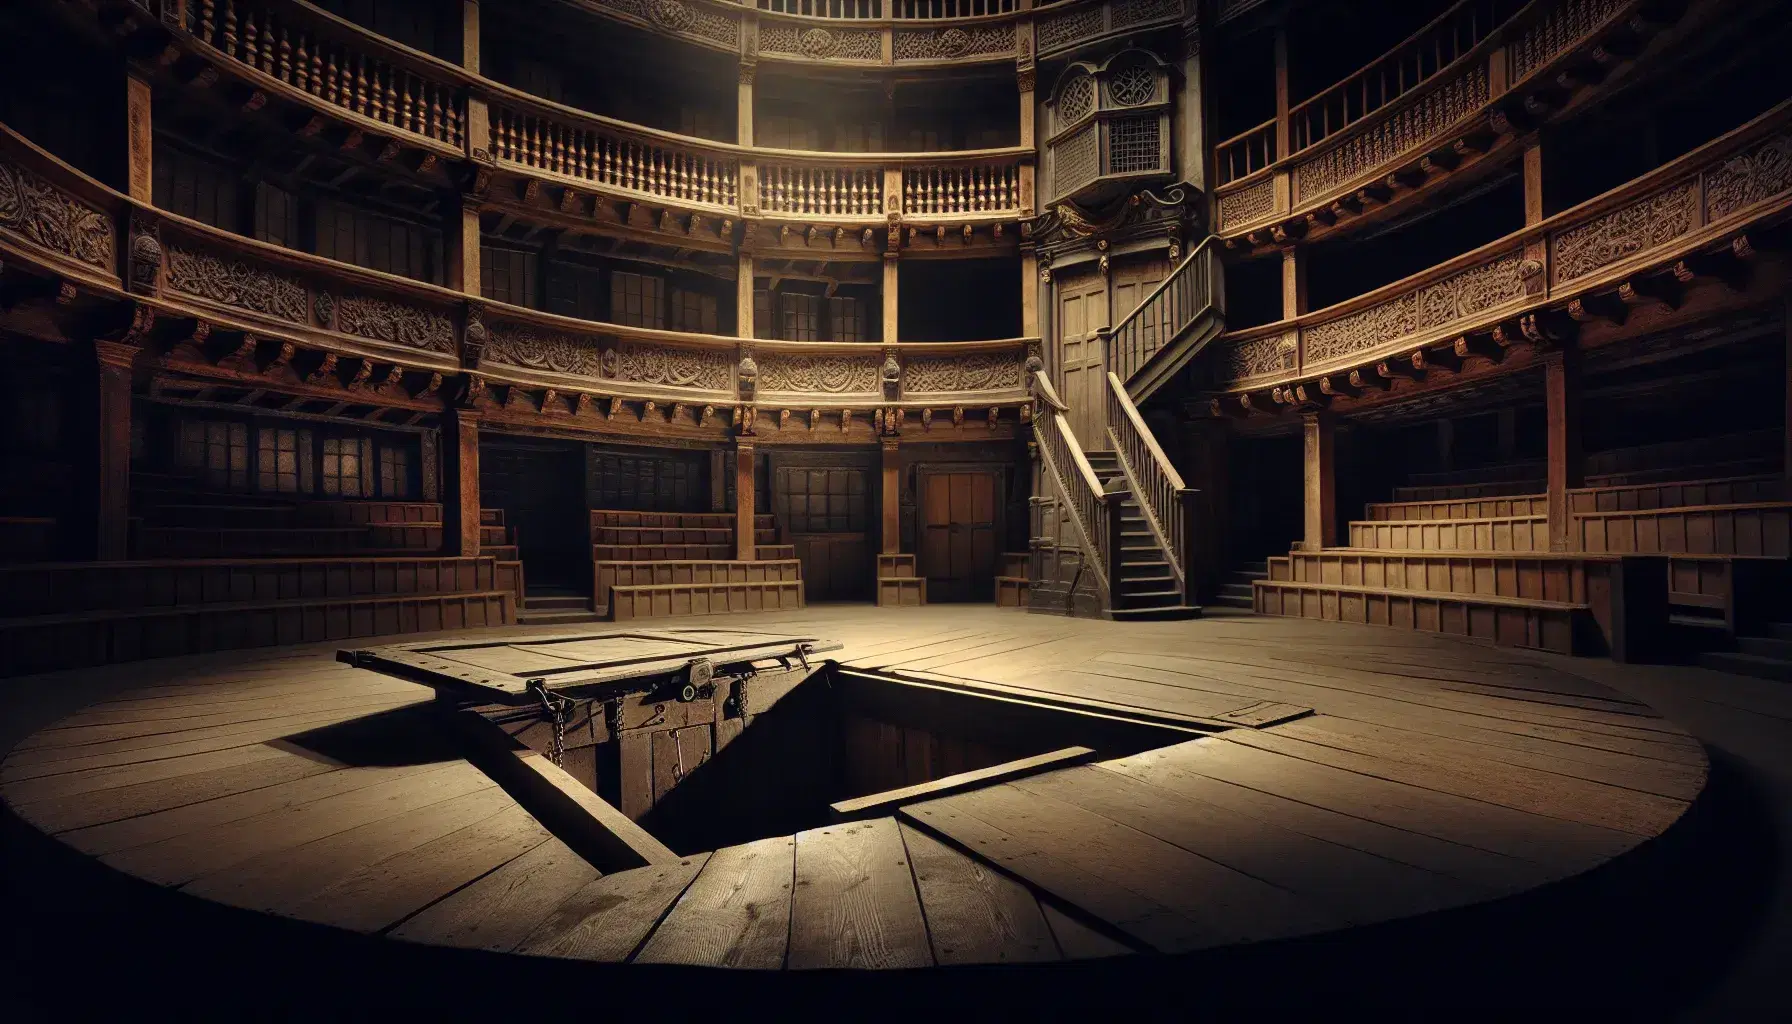 Scene from an Elizabethan theater with wooden stage and trap door, carved balcony and empty benches, soft lighting from above.